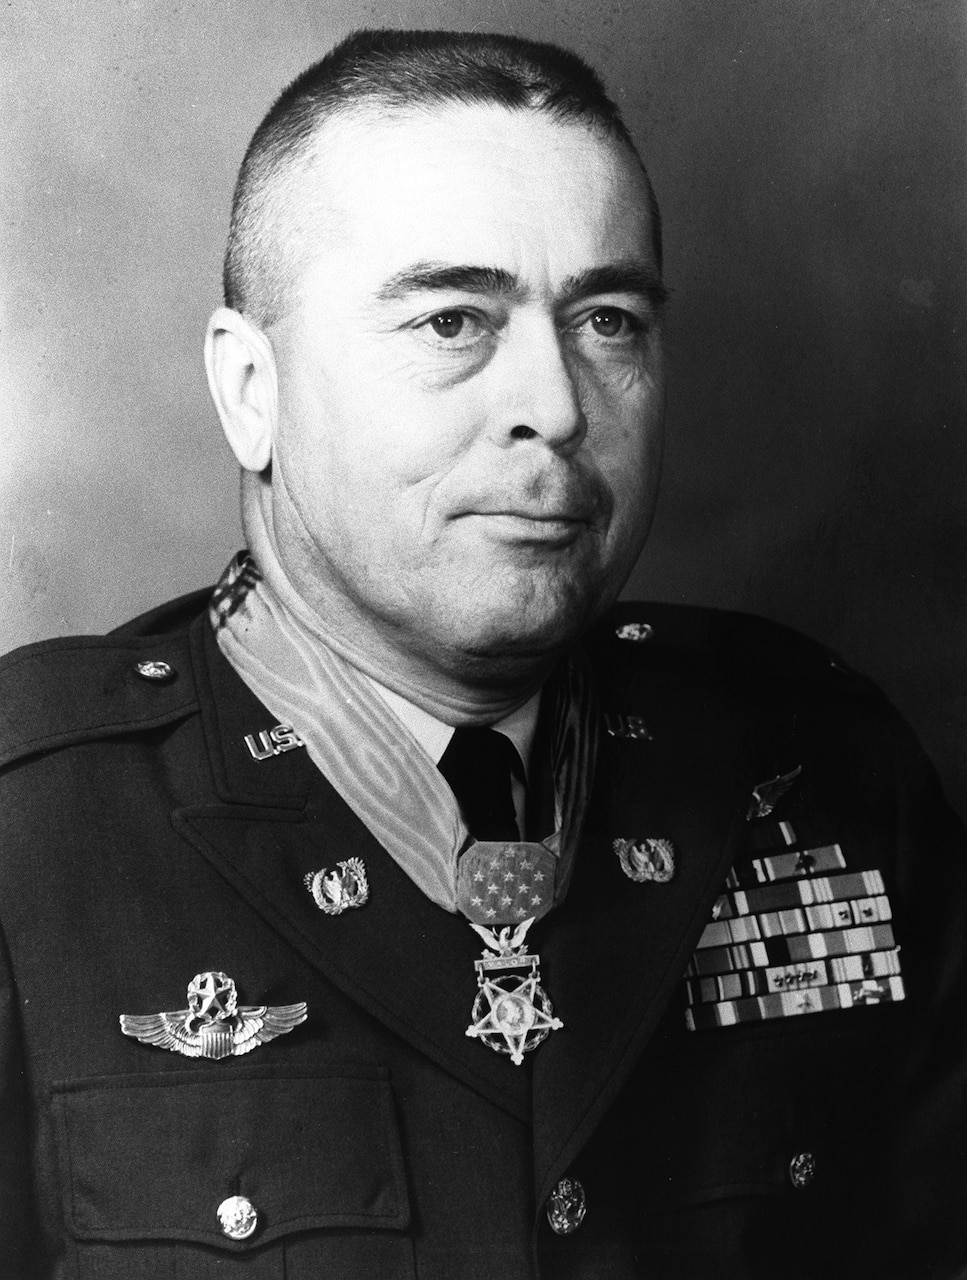 A person in uniform who wears a medal on his neck poses for a photo.